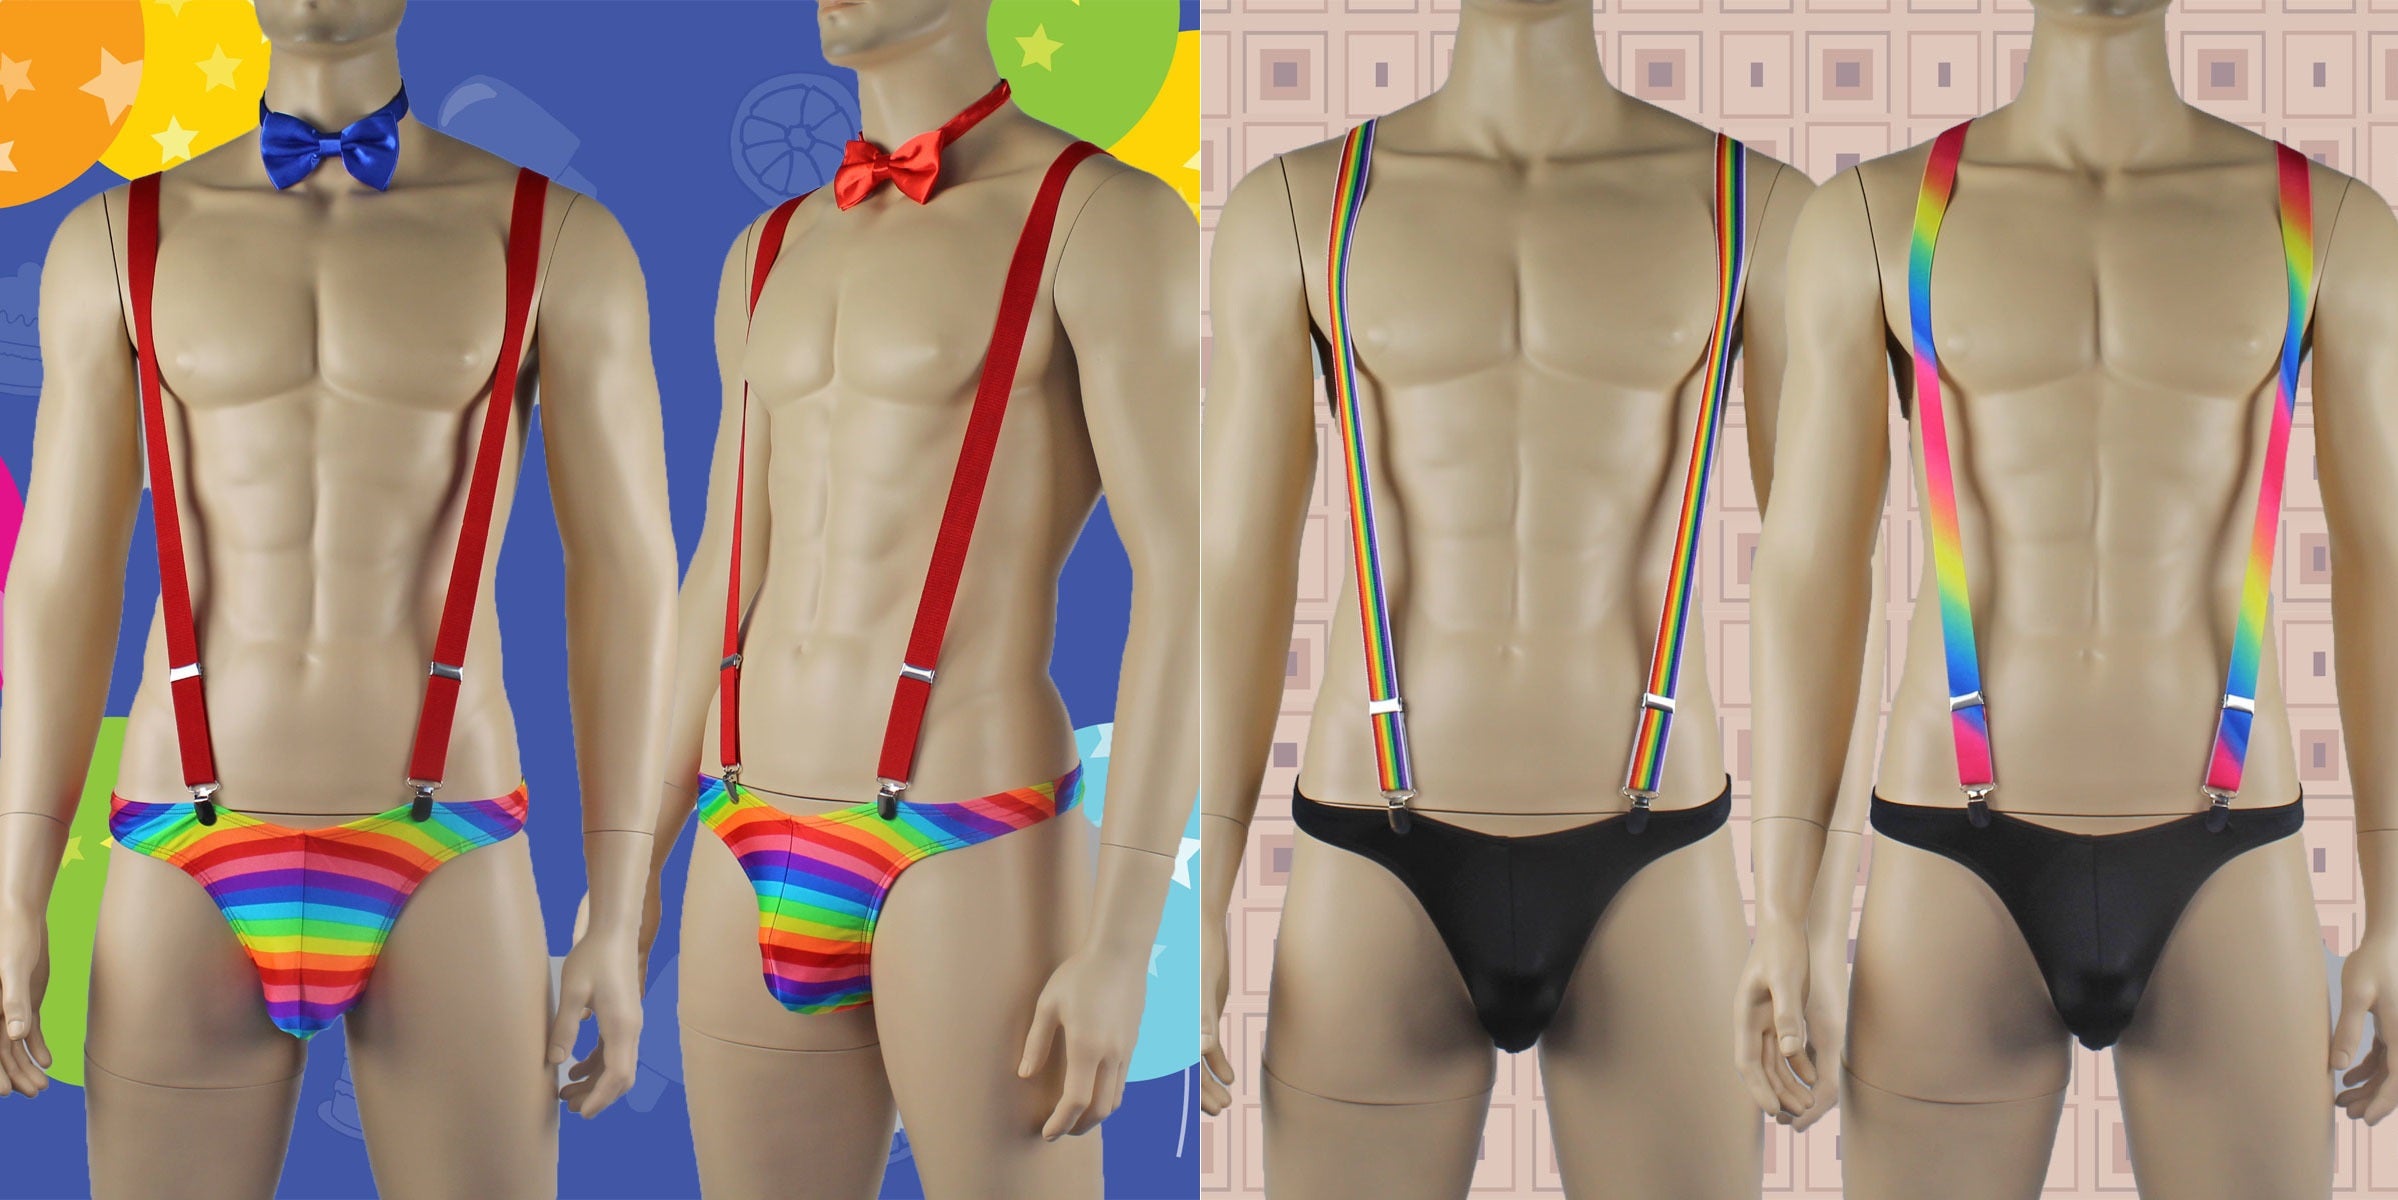 Brace Yourselves with these Fun & Colorful Suspenders to Accentuate Your Thongs!